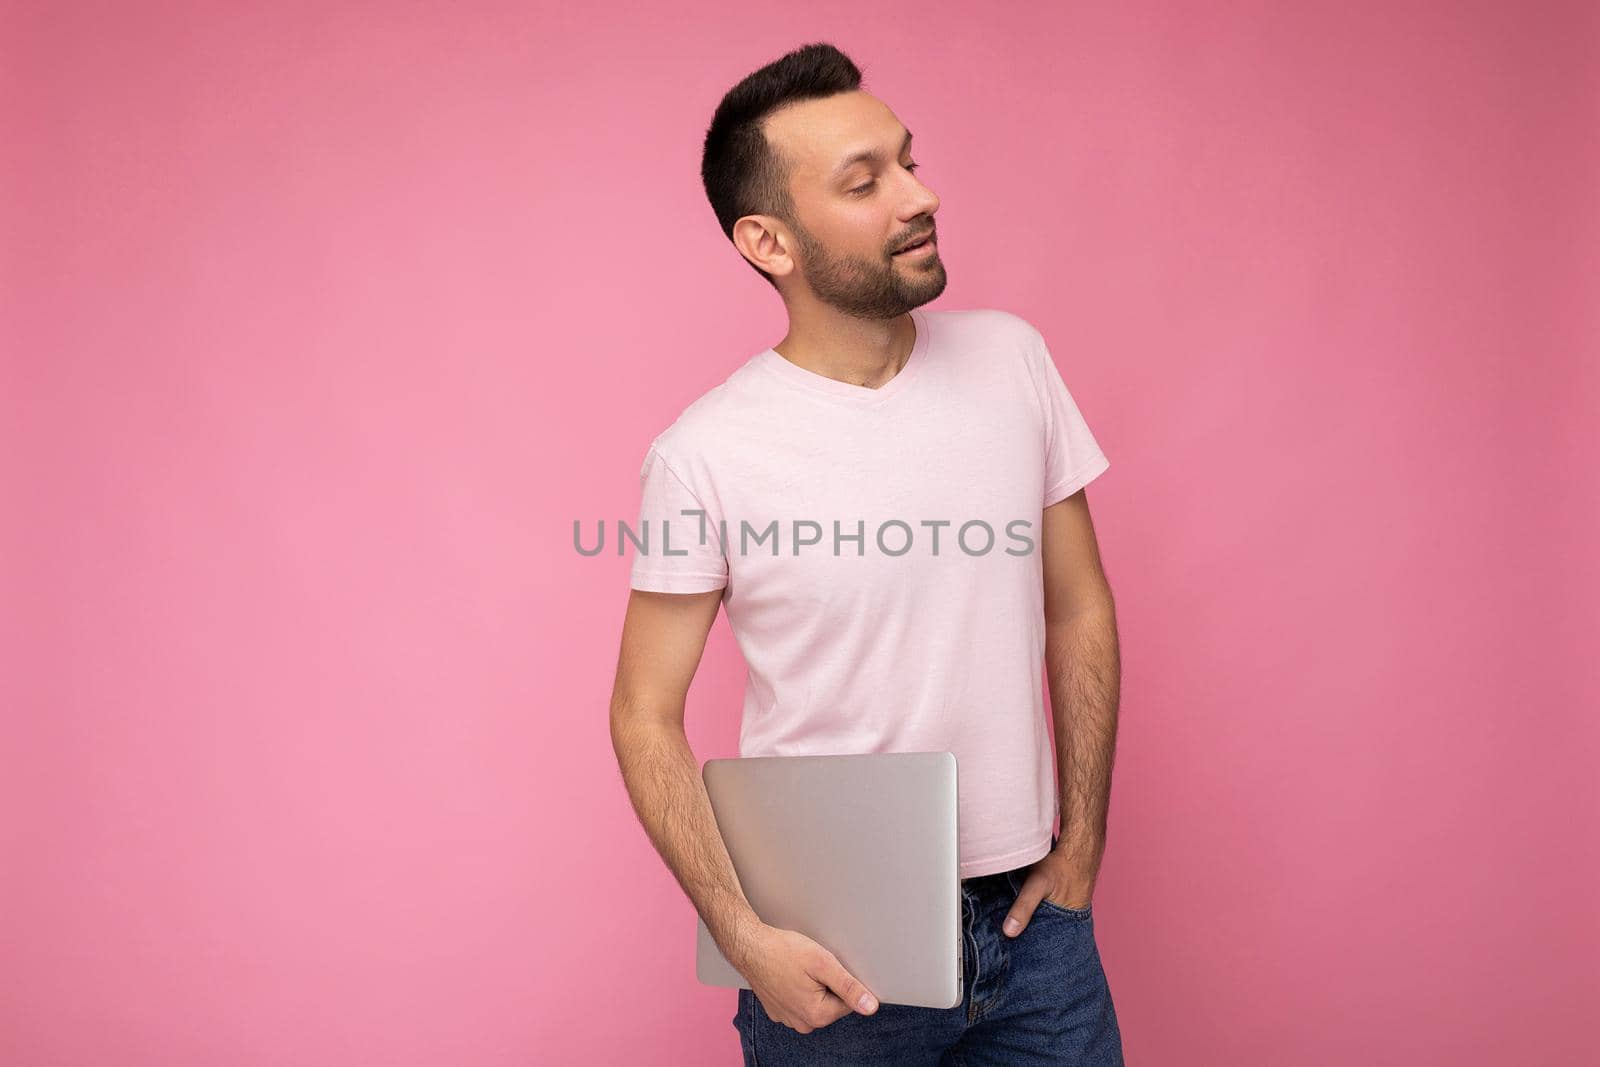 Handsome happy young unshaven man holding laptop computer looking to side in t-shirt on isolated pink background.